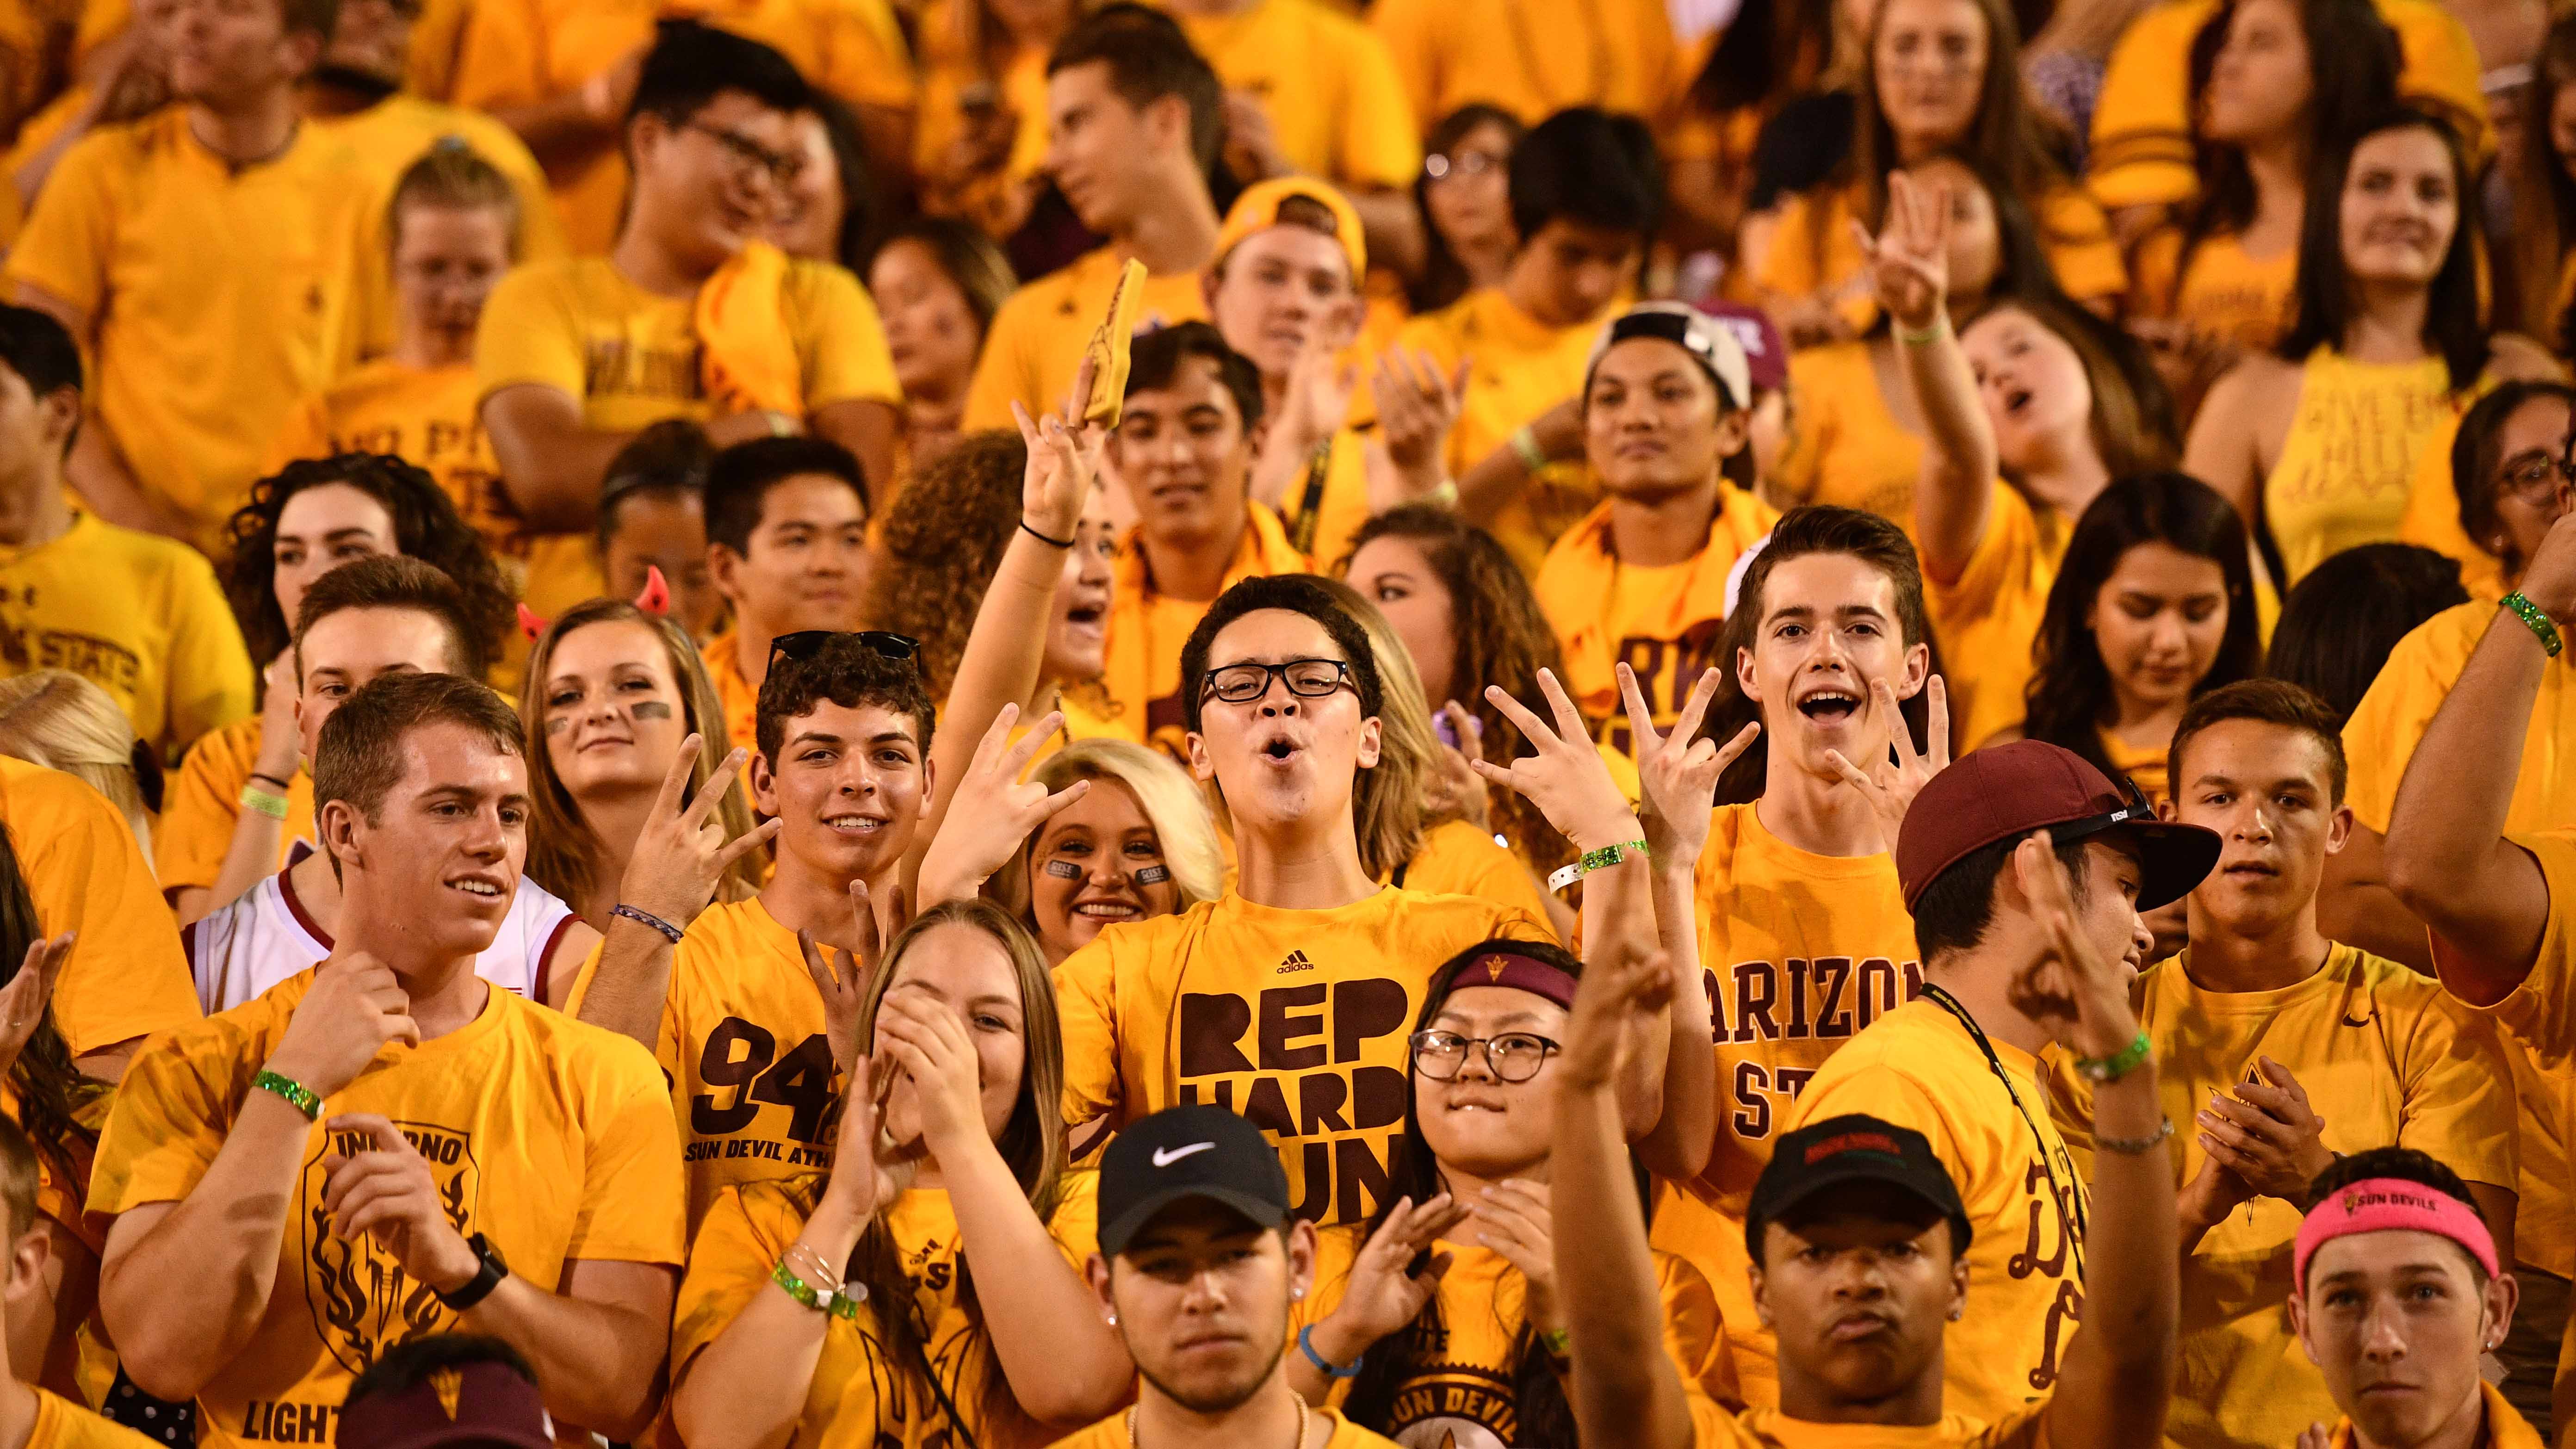 Students wear gold in the Inferno student section at Sun Devil Stadium for a football game